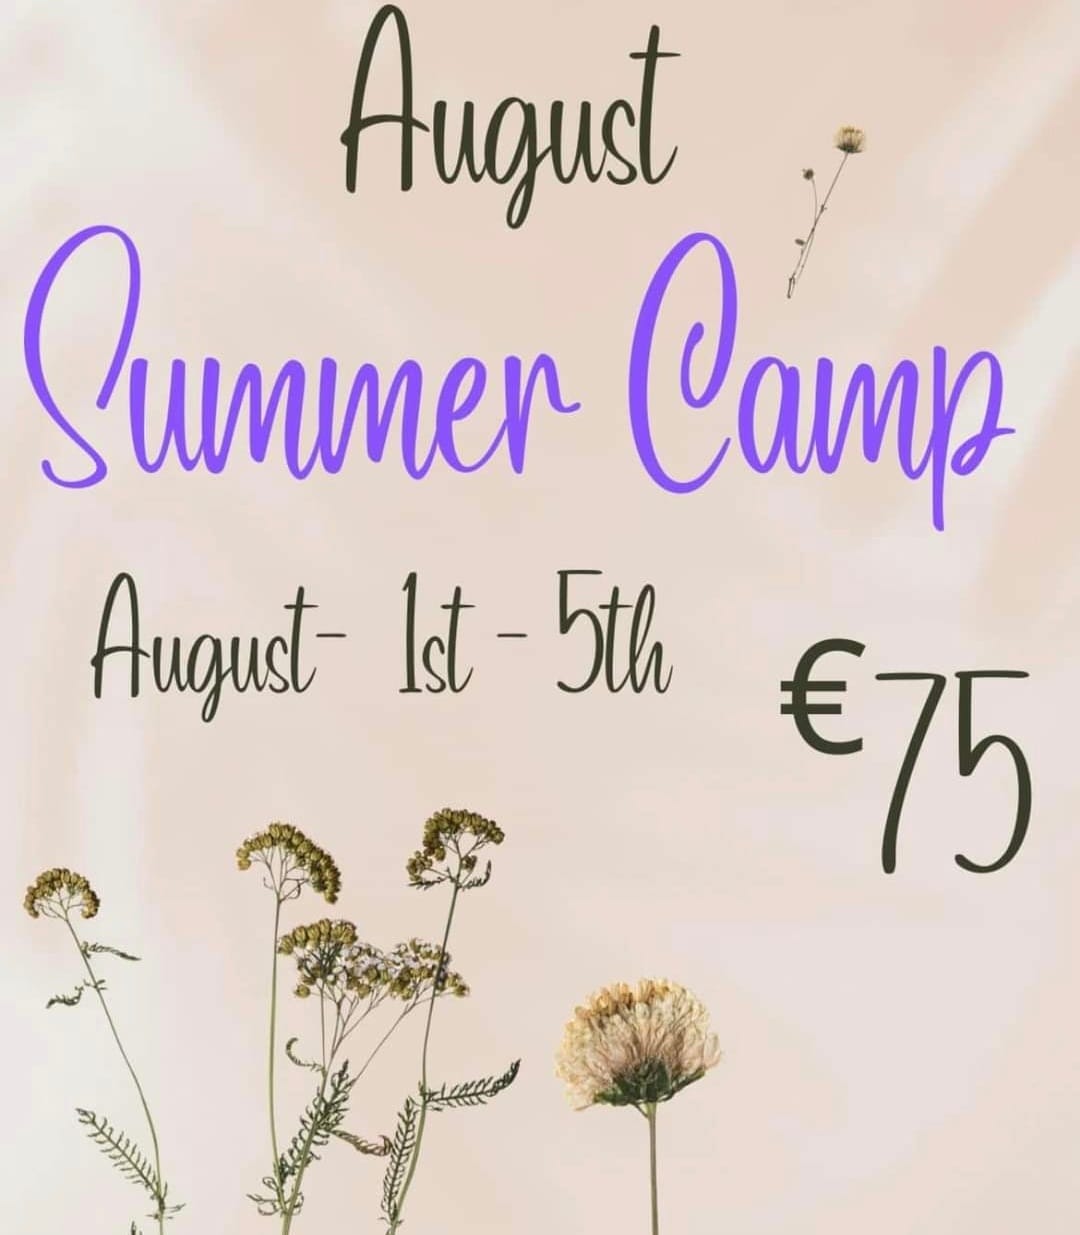 Claire's Art Summer Camp